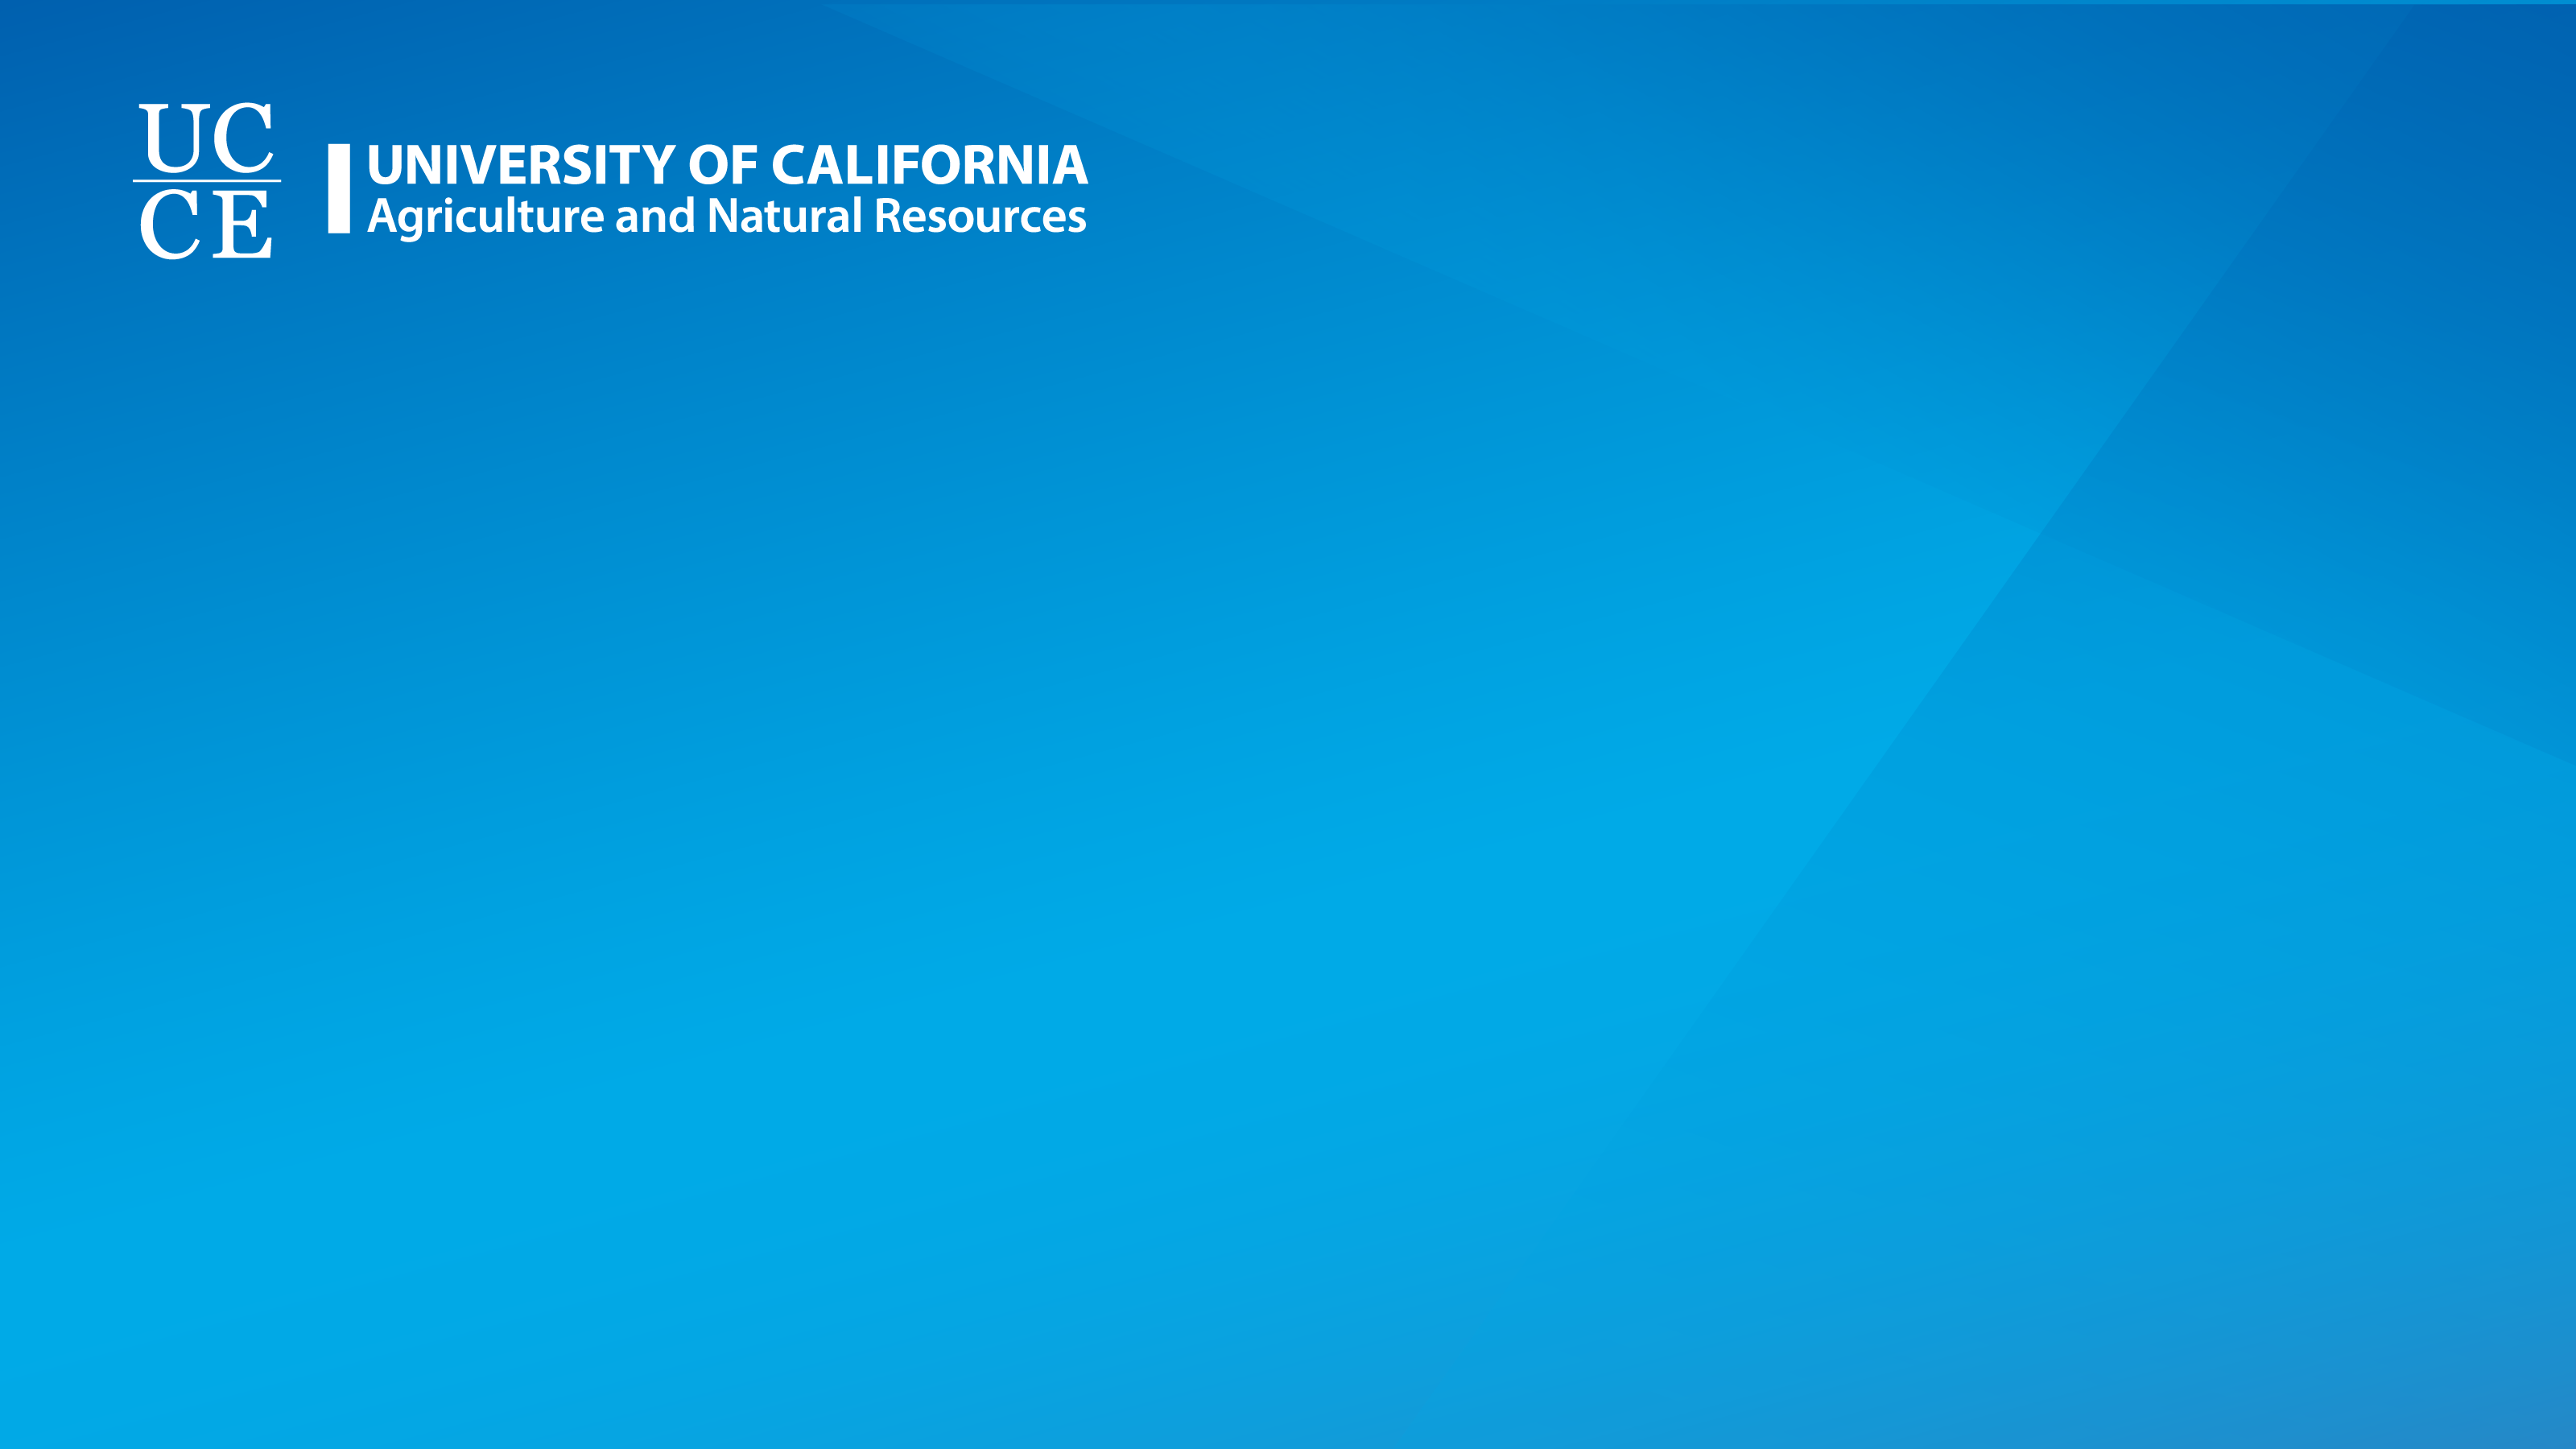 UCCE UC ANR branded Zoom background